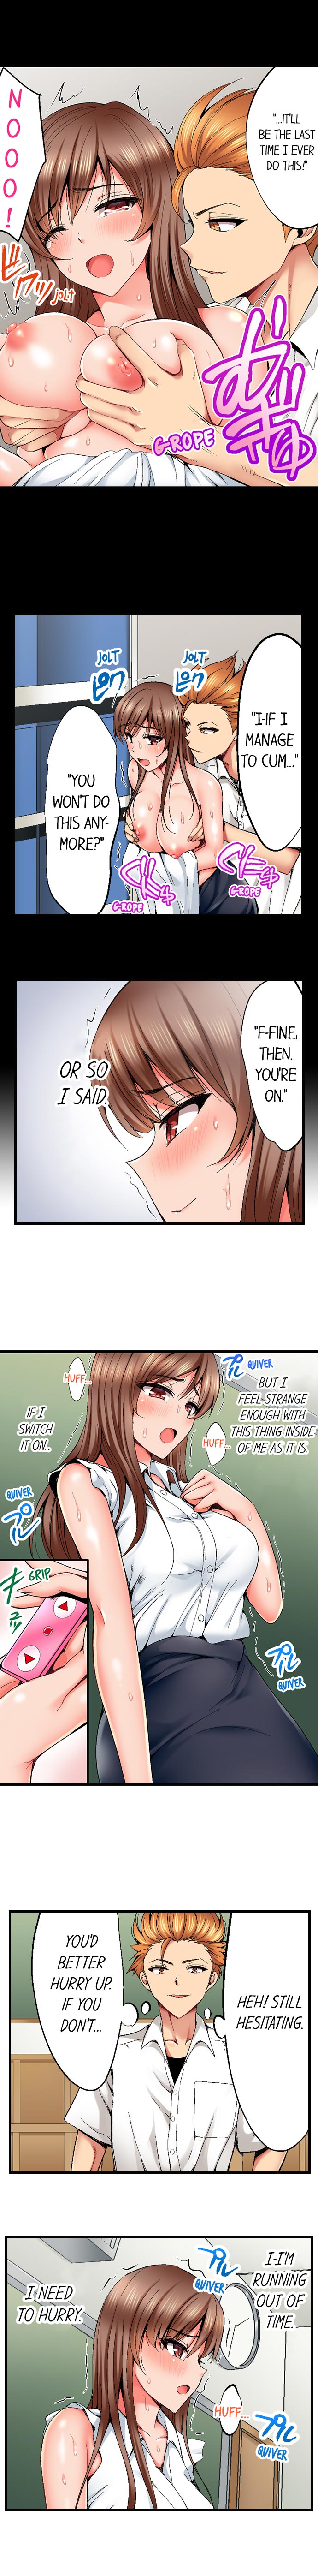 Netorare My Teacher With My Friends - Chapter 7 Page 4